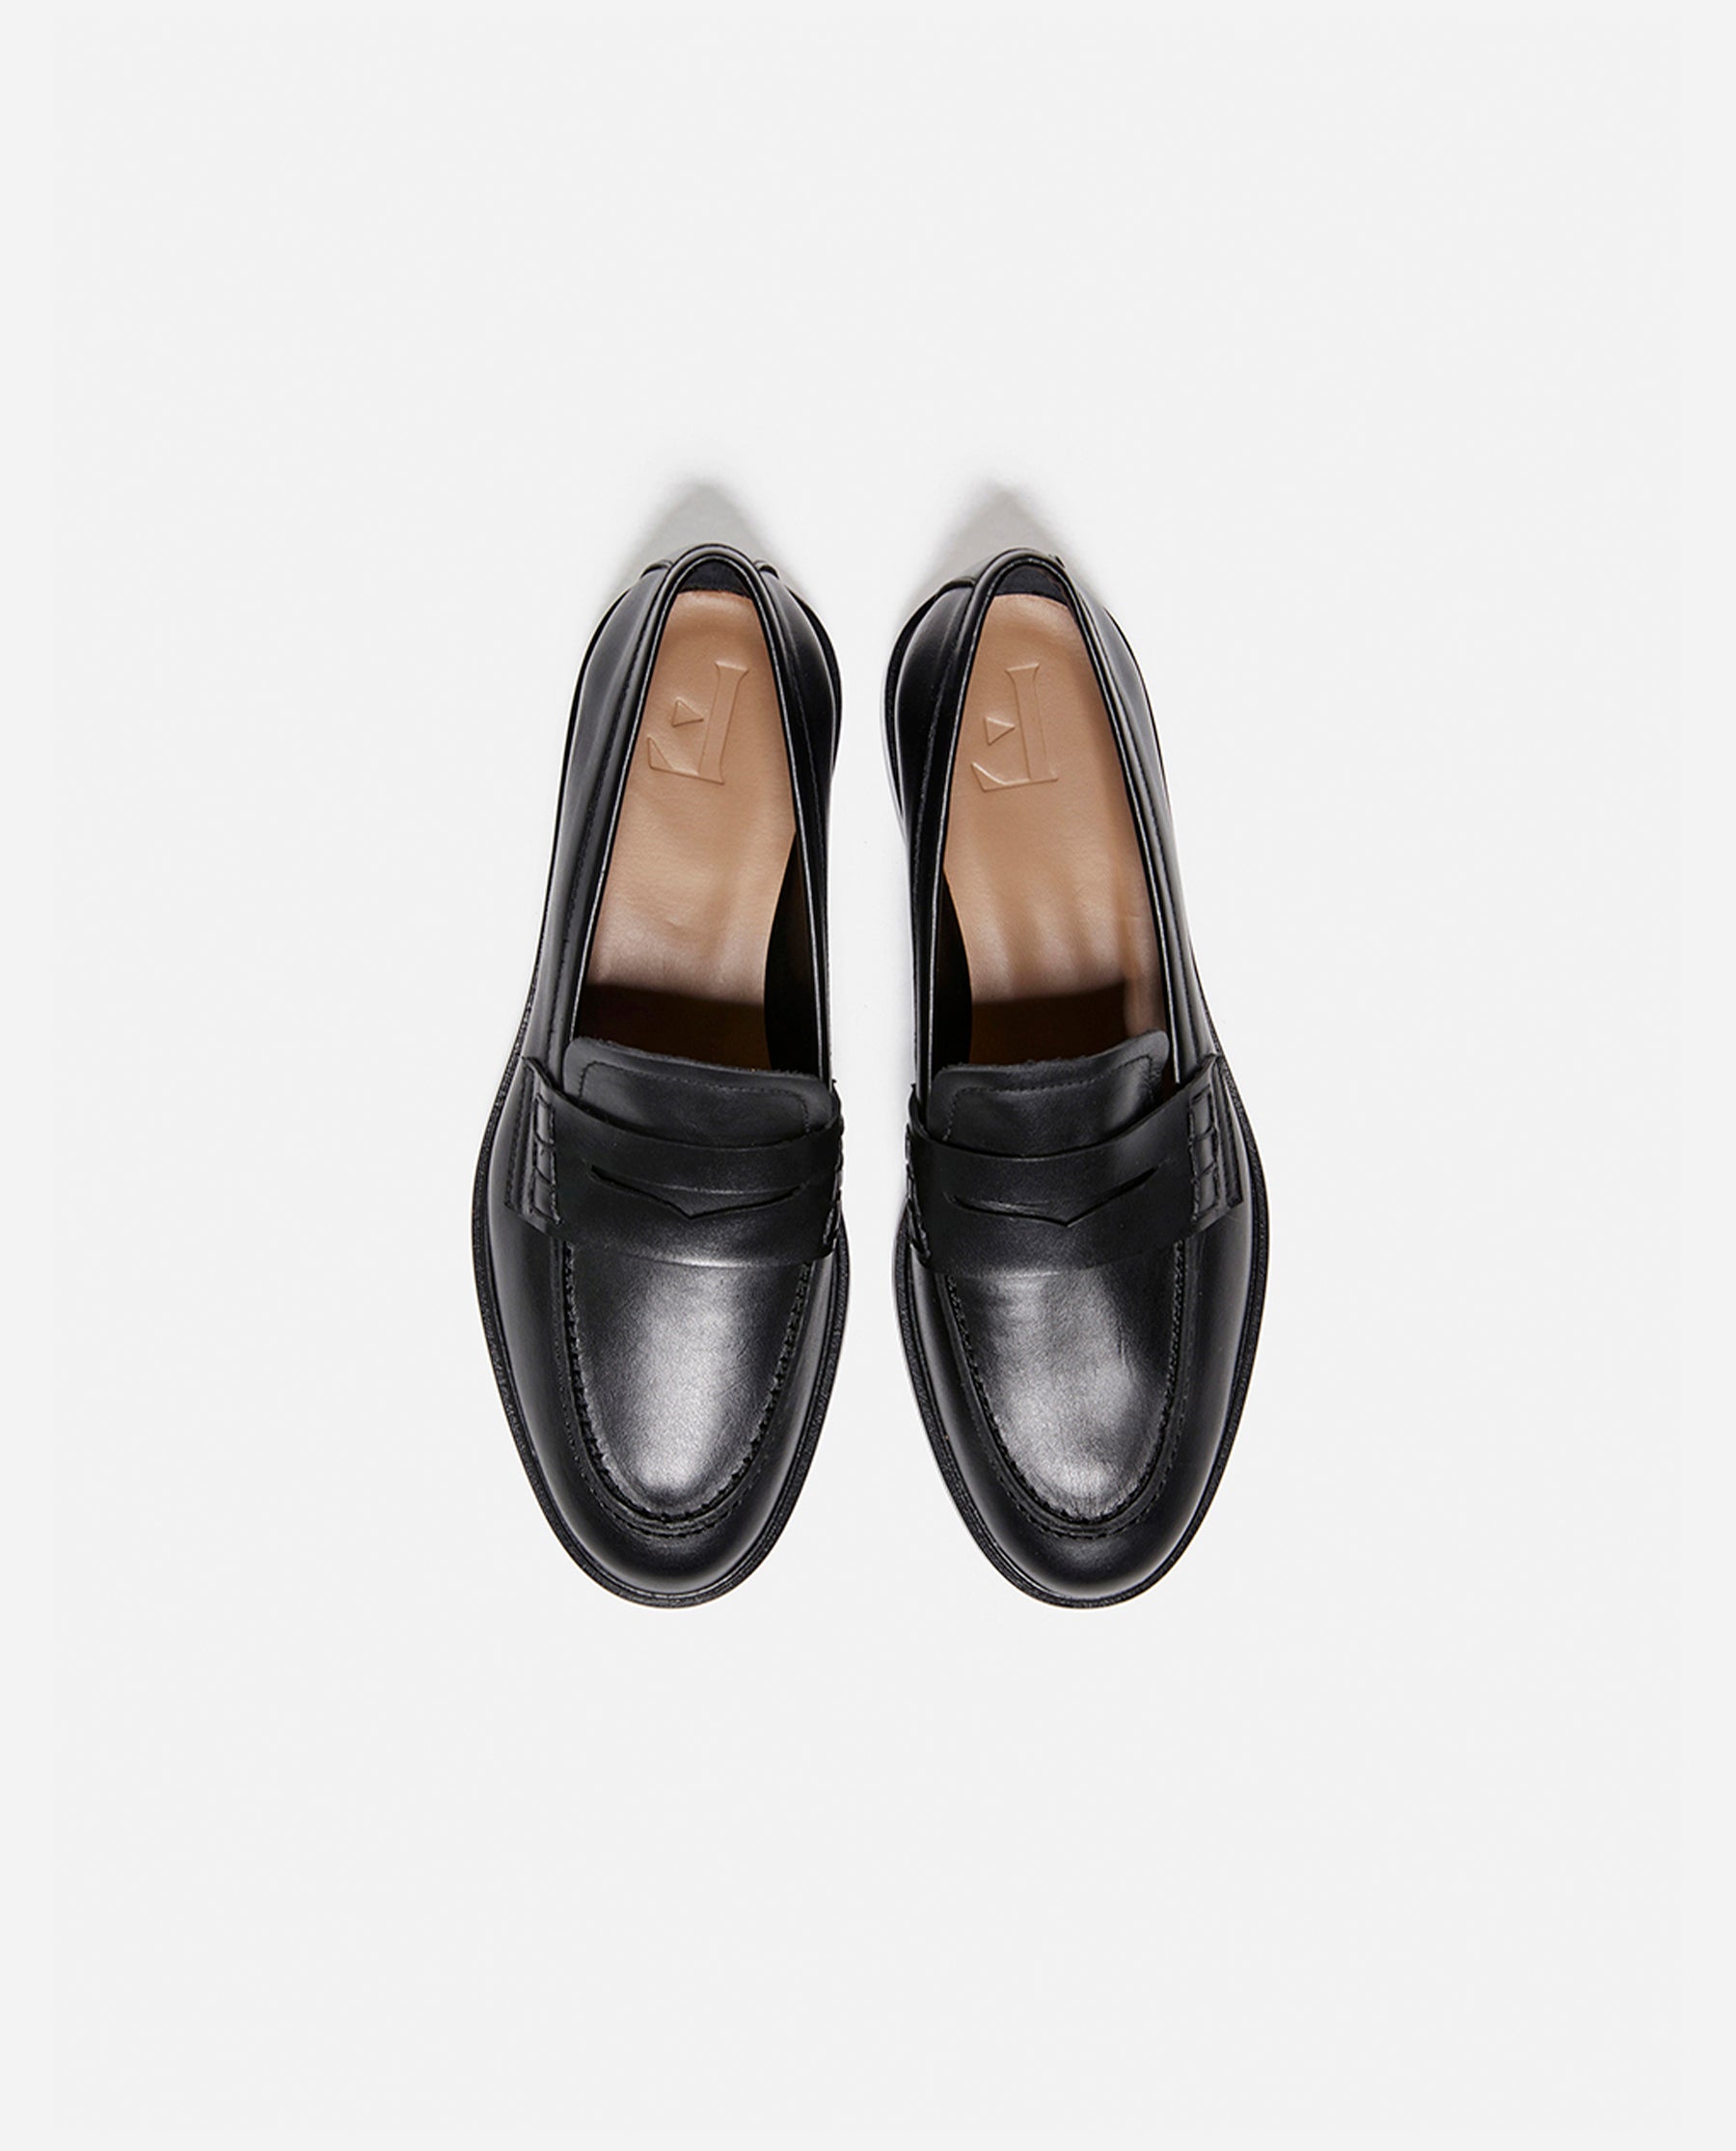 Sara Black Leather Loafers 21010115601-001 - 5